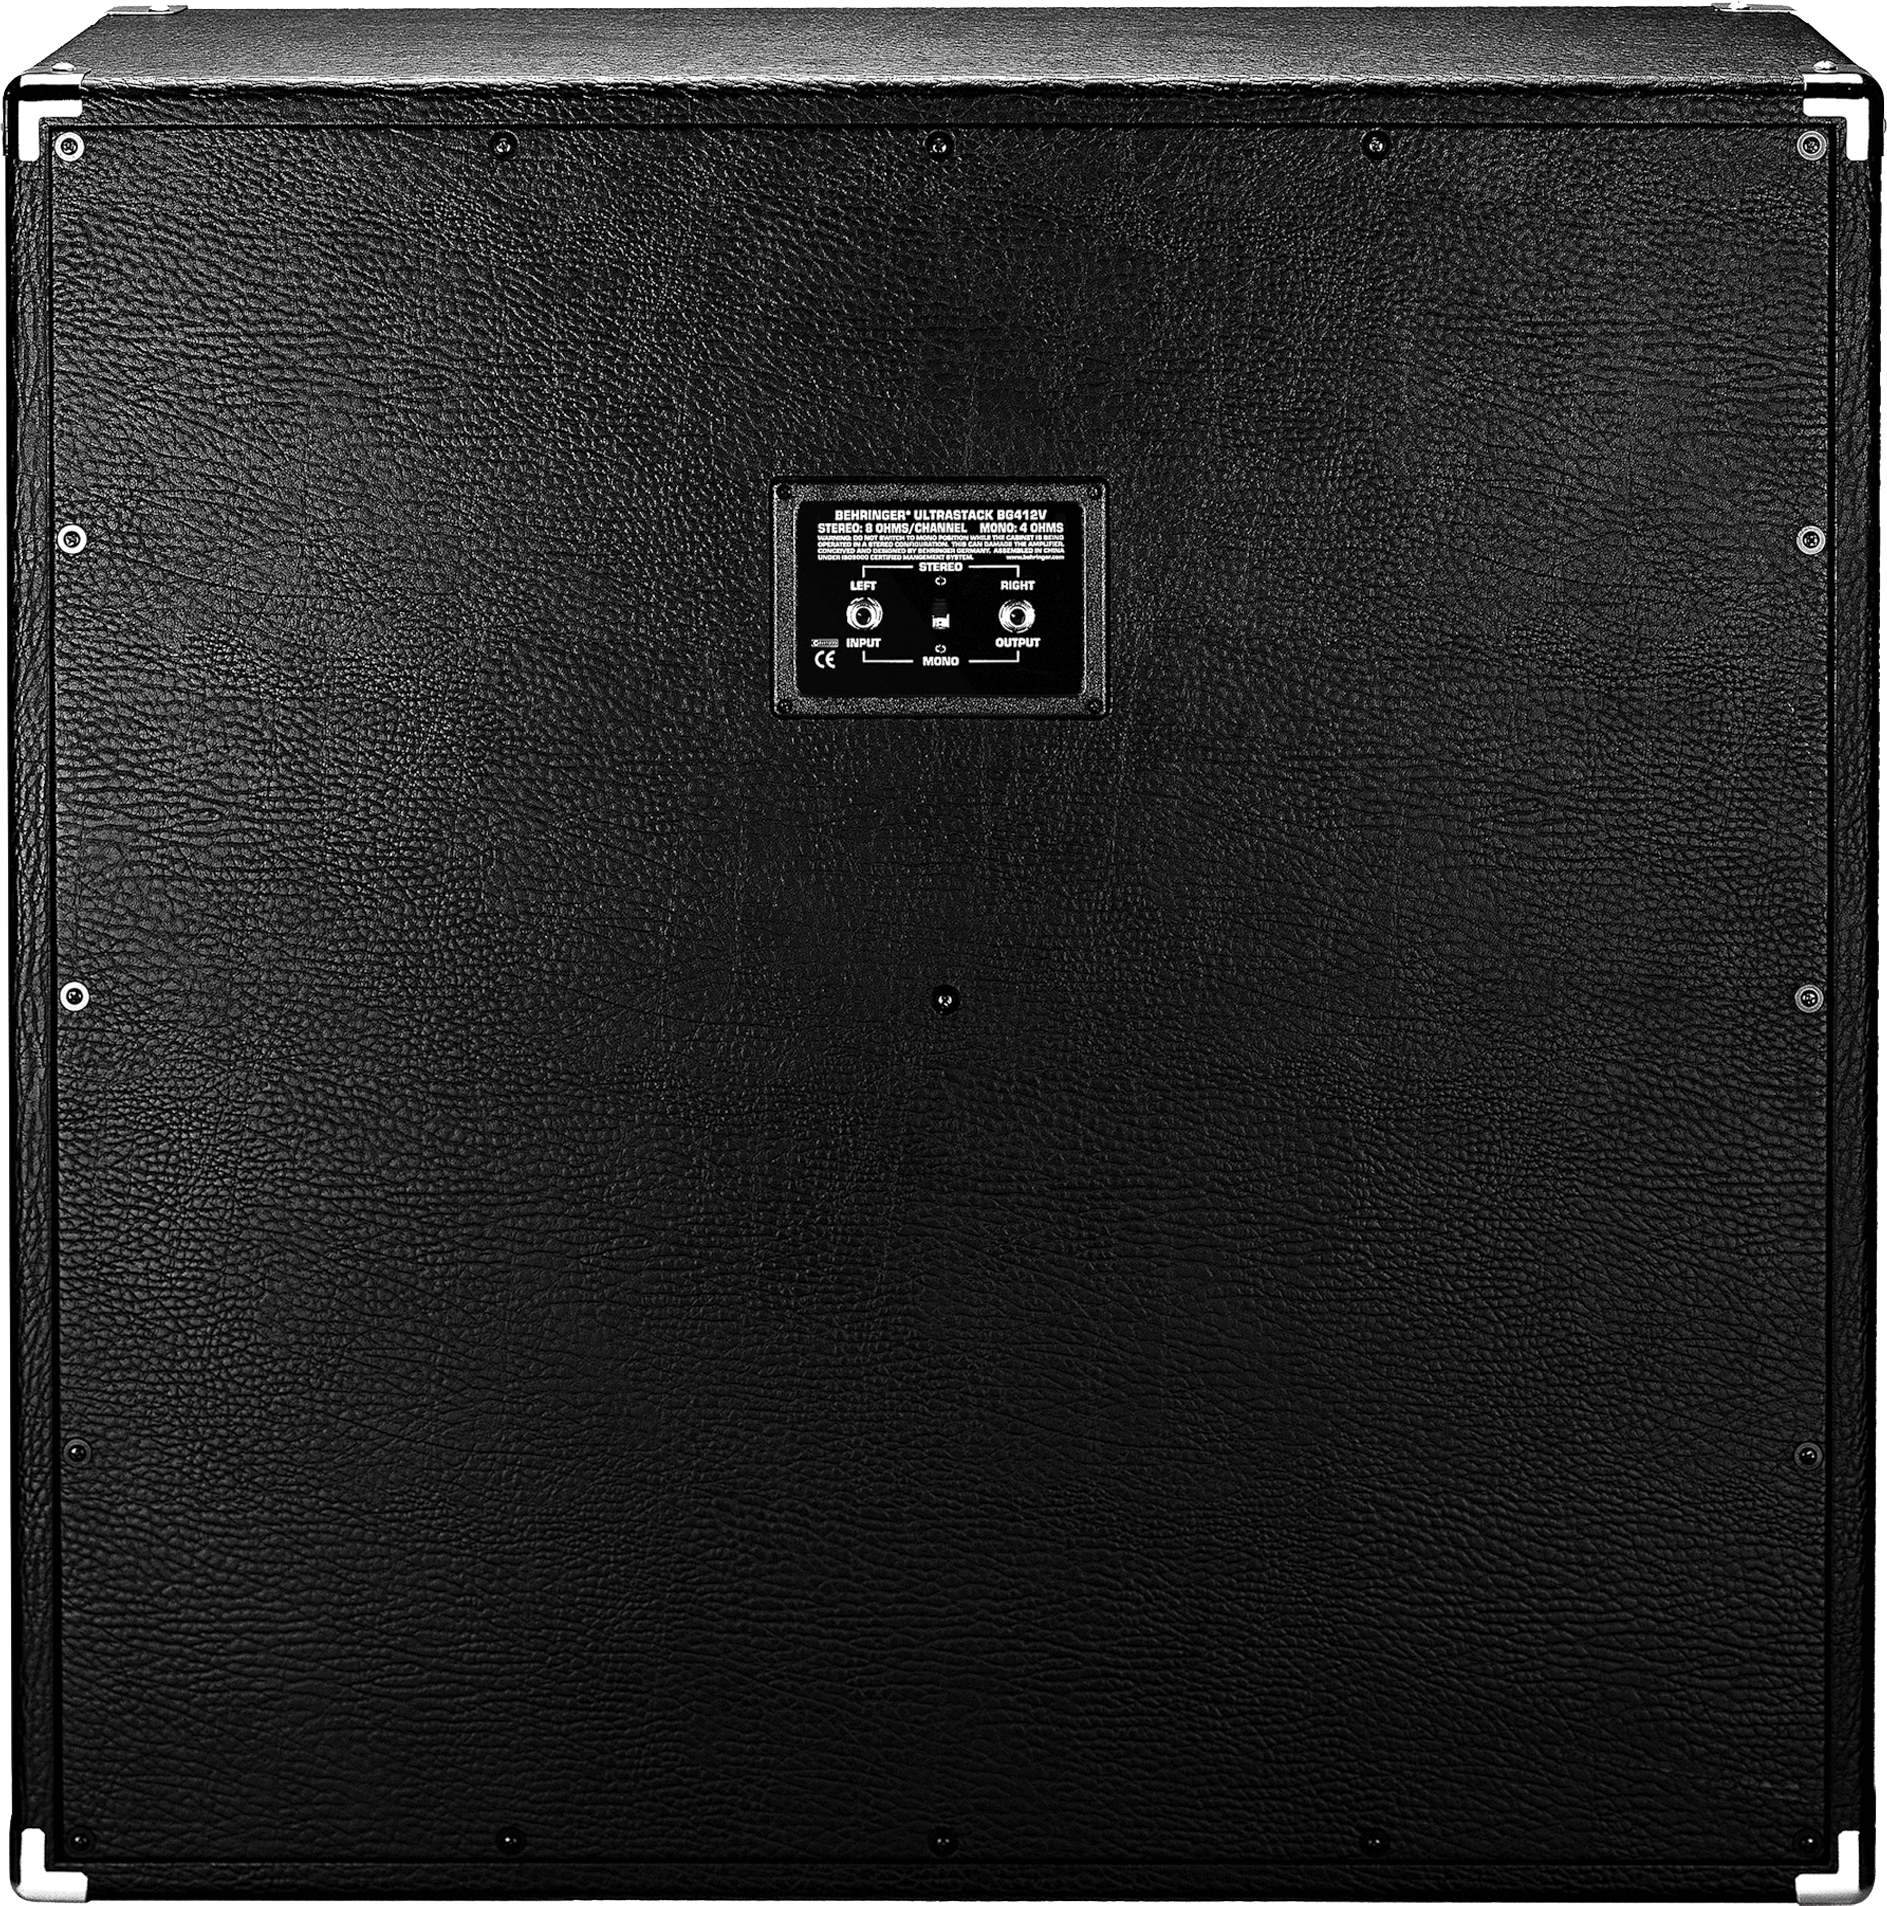 Used 8 OHM 4X12 Guitar Speaker Cabinets 4 x 12 Guitar Speaker Cabinets